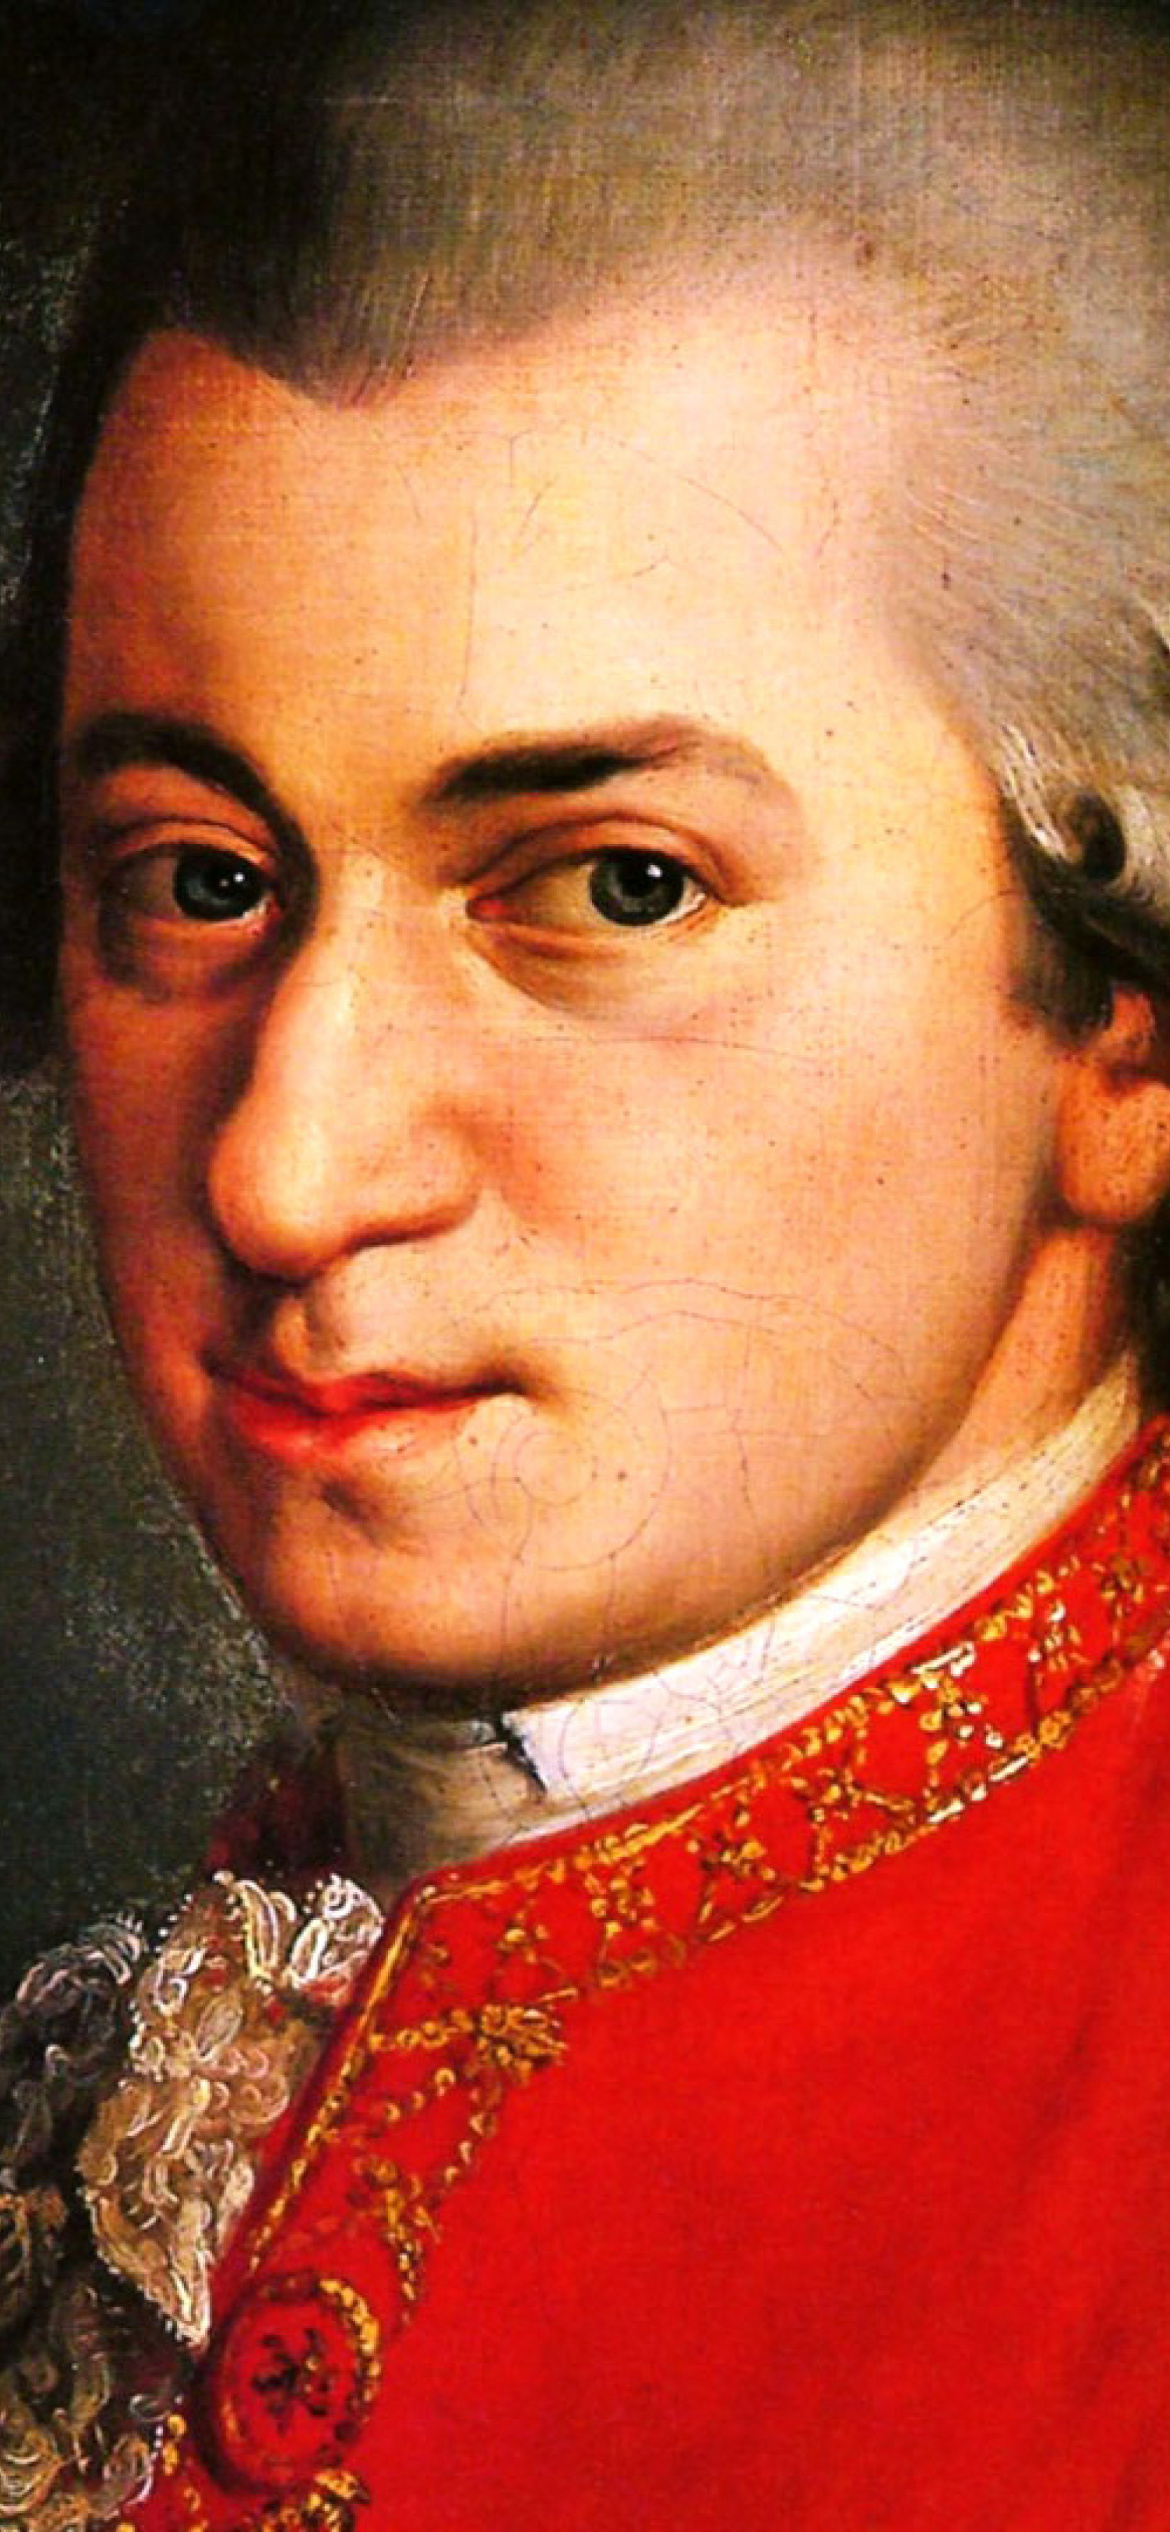 Wolfgang Amadeus Mozart, Wallpaper for iPhone, Musical inspiration, Prodigy's portrait, 1170x2540 HD Handy